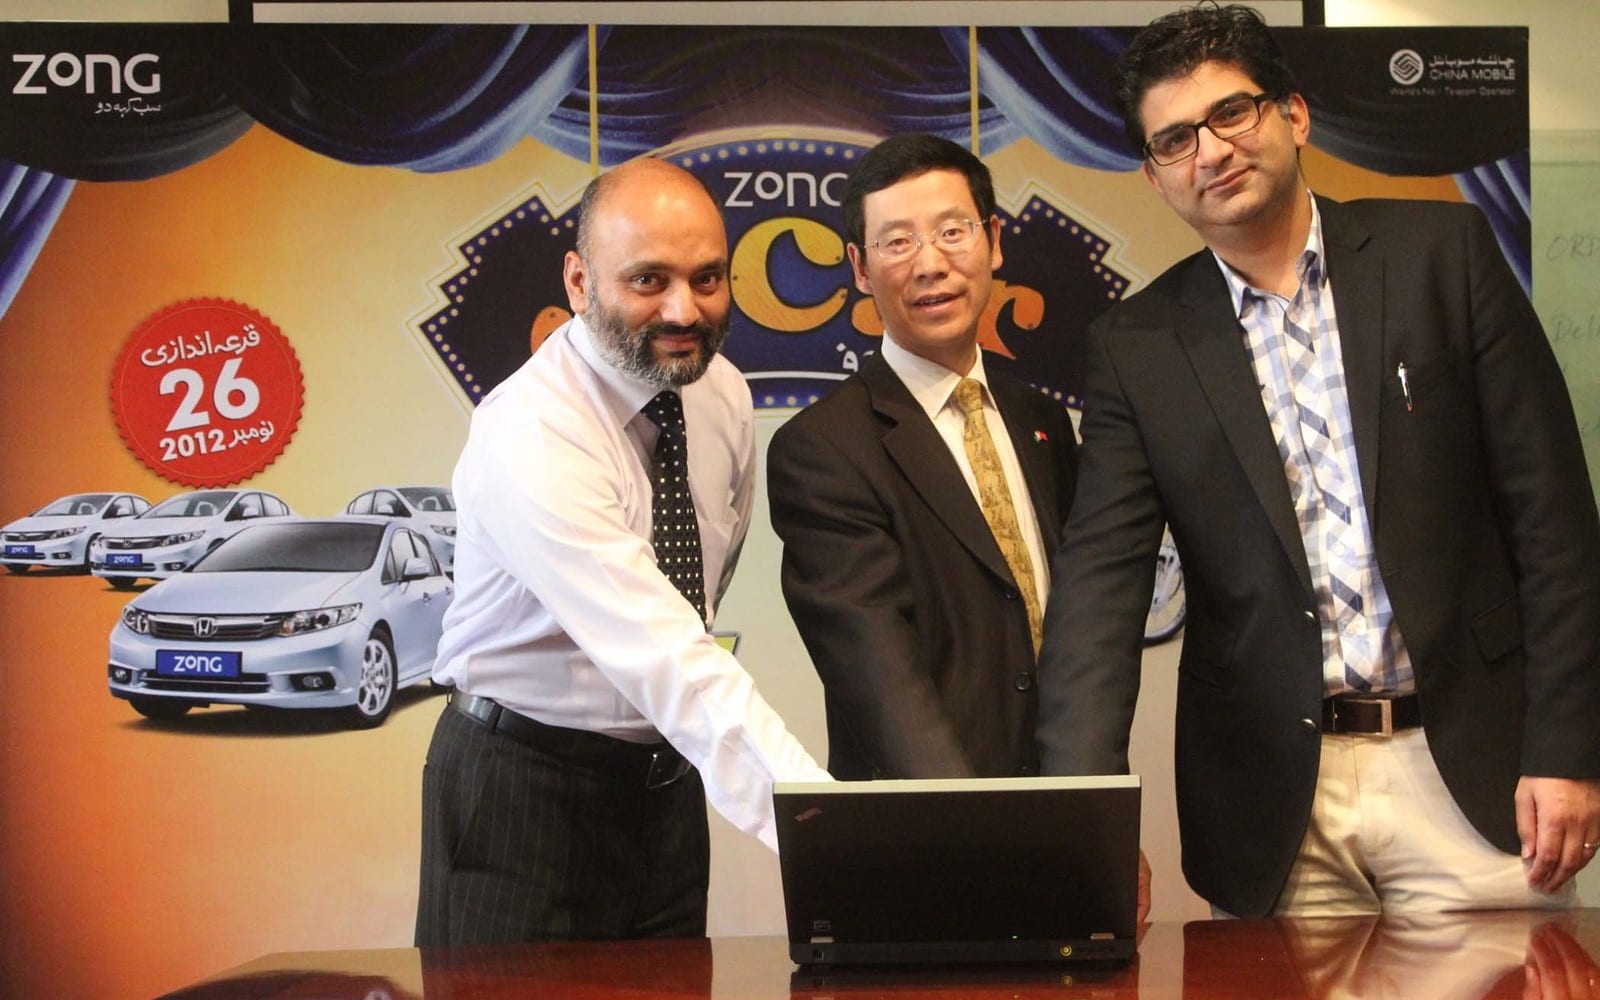 Zong Announces the Winners of Carnama Offer